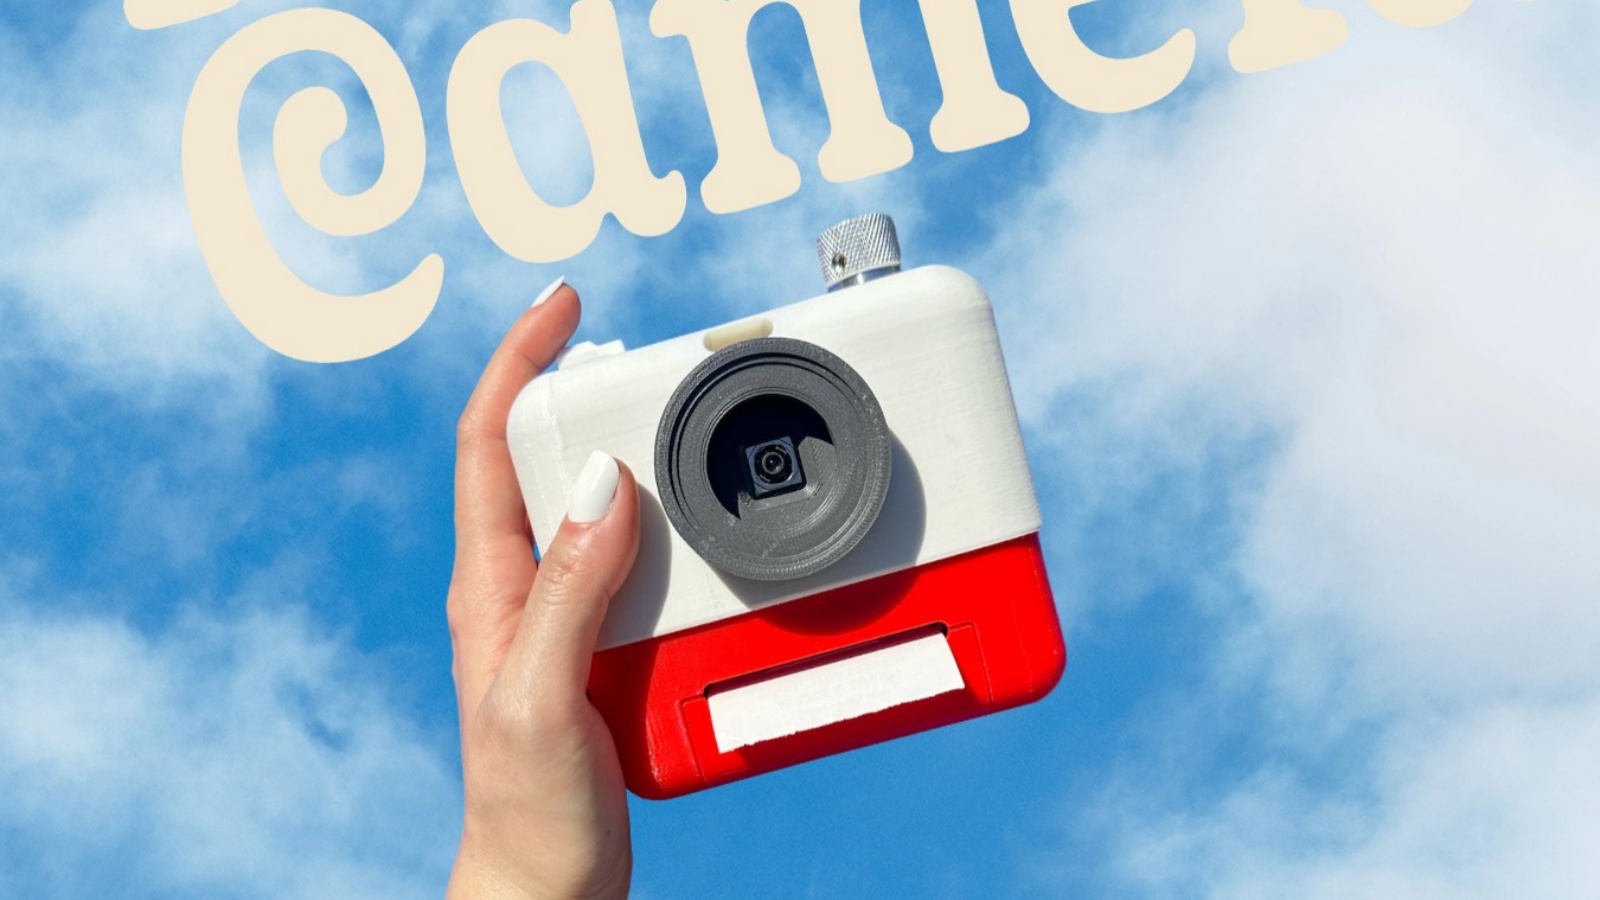 Technology News: AI-powered Camera Transforms Pictures into Poems